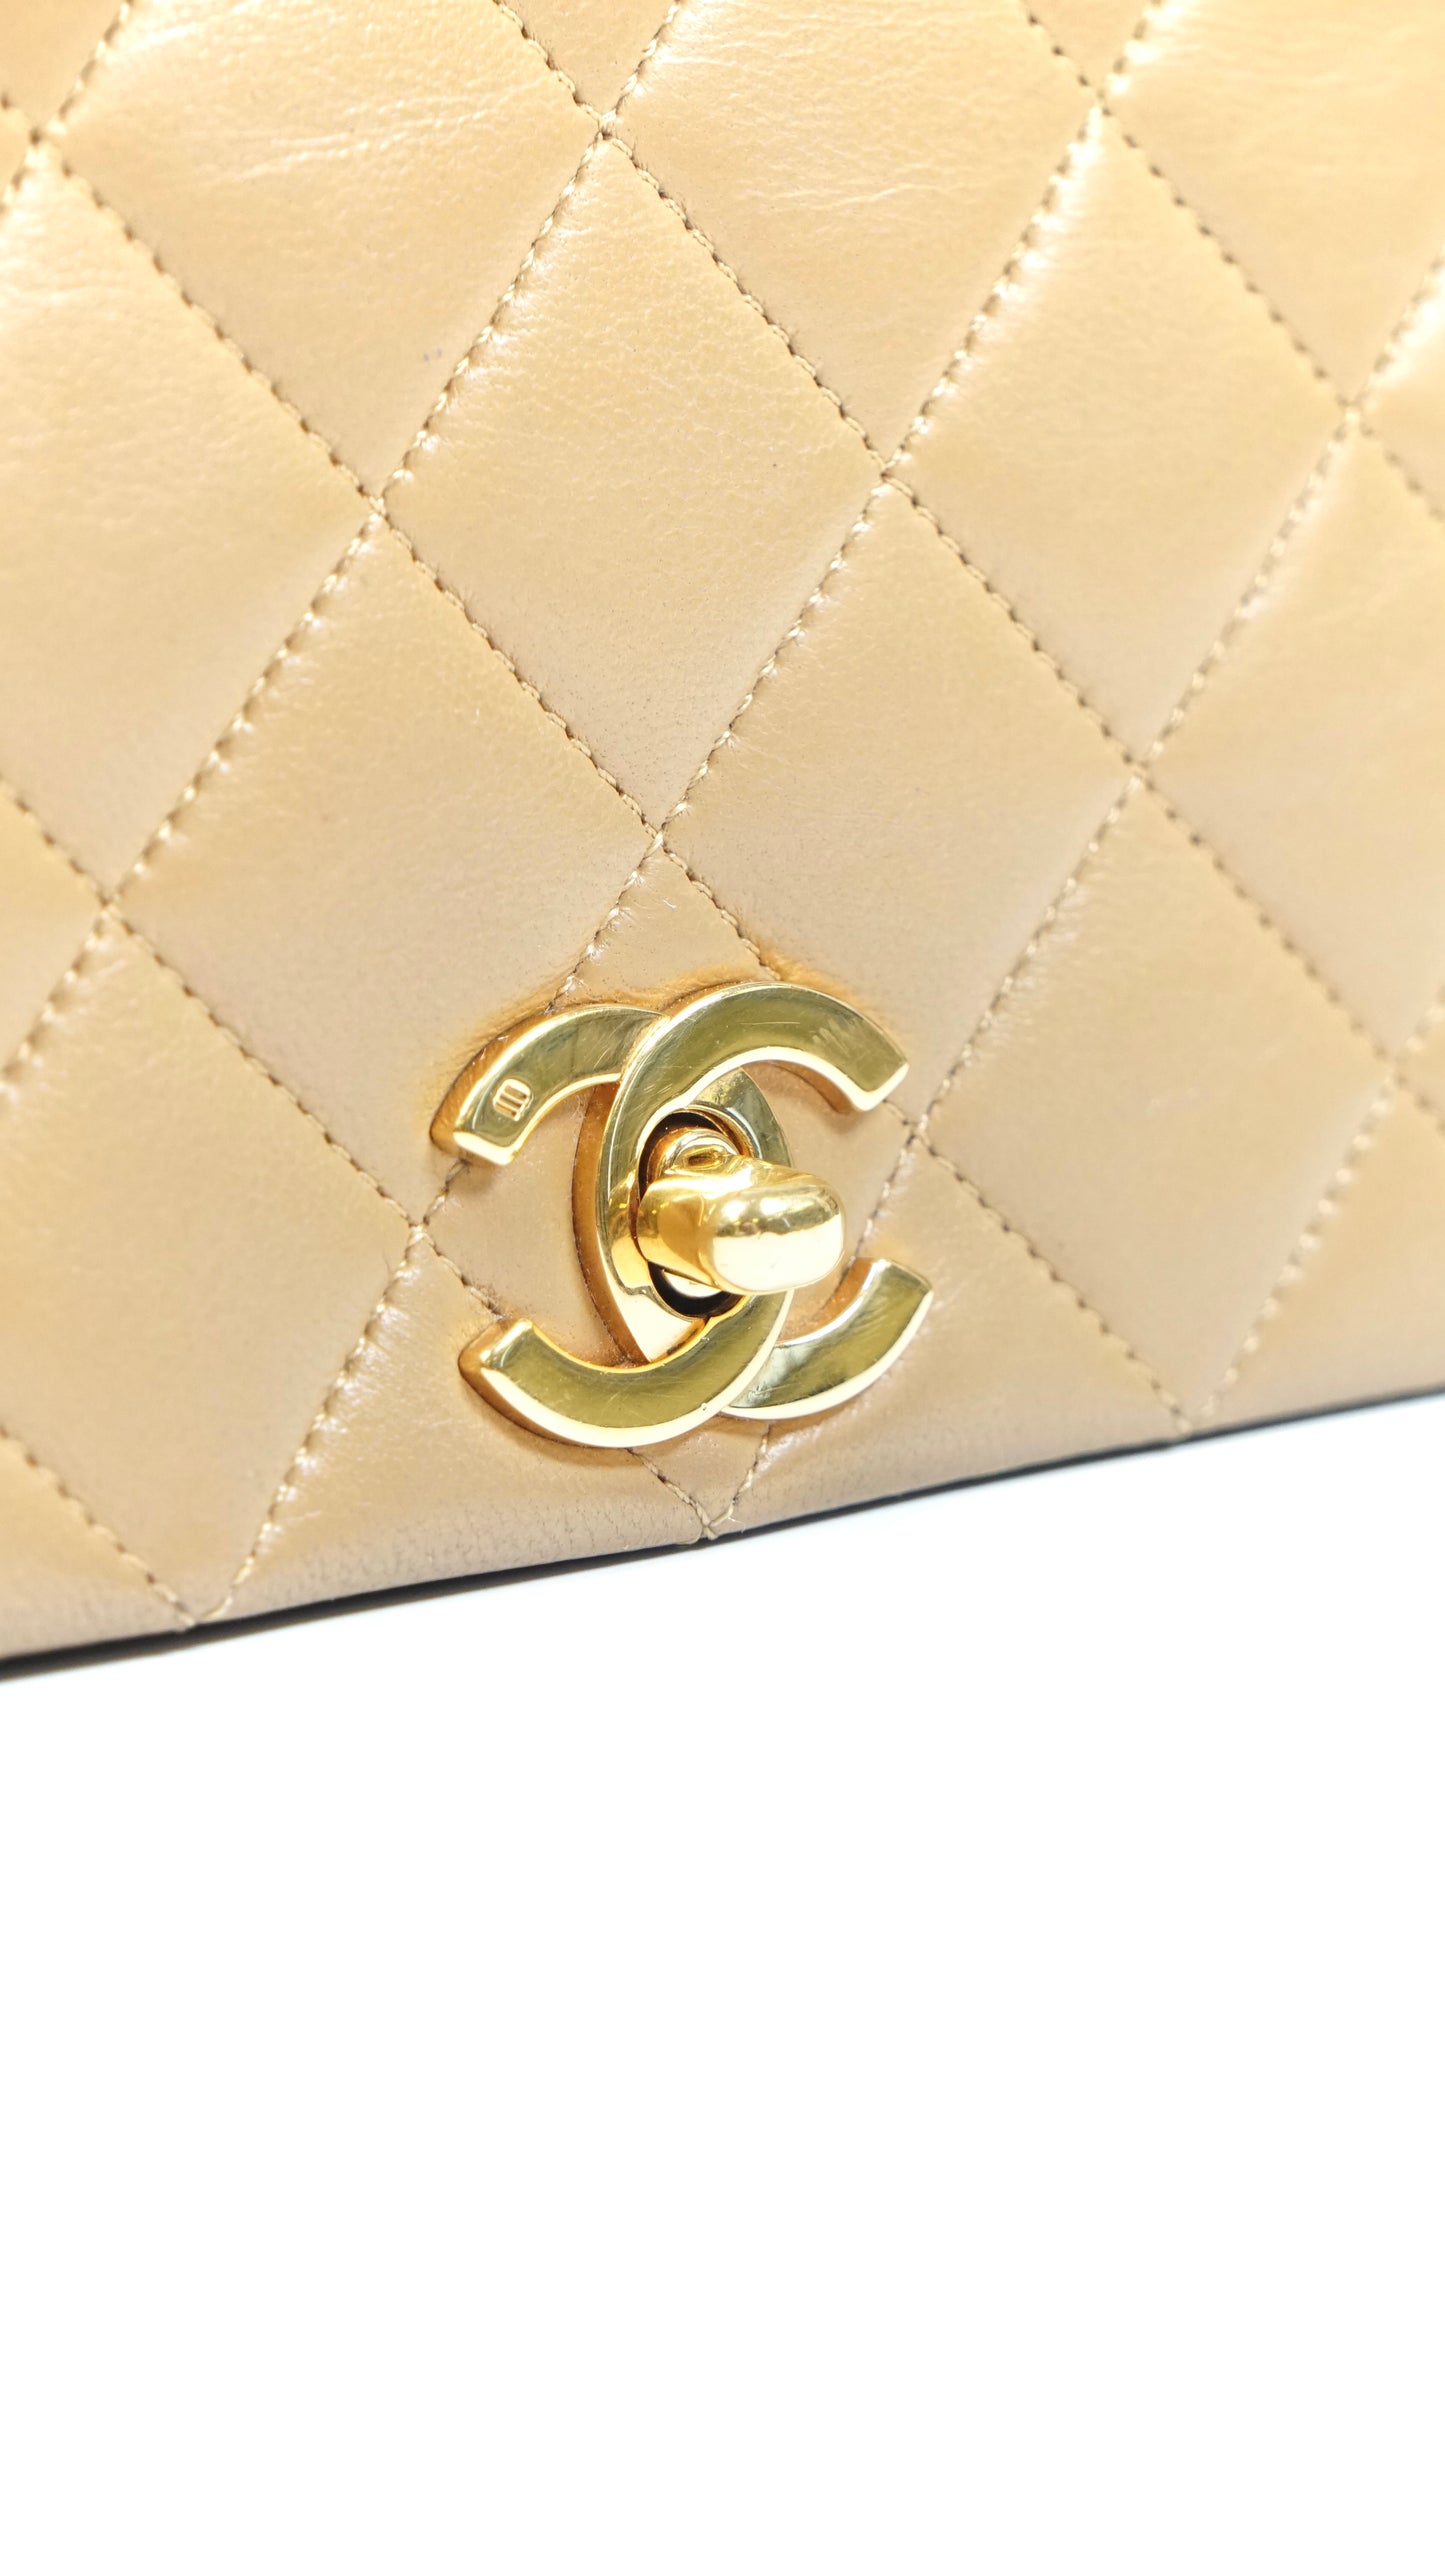 Stanislaw, 1 series 23cm full flap yellow caramel lambskin with seal and card